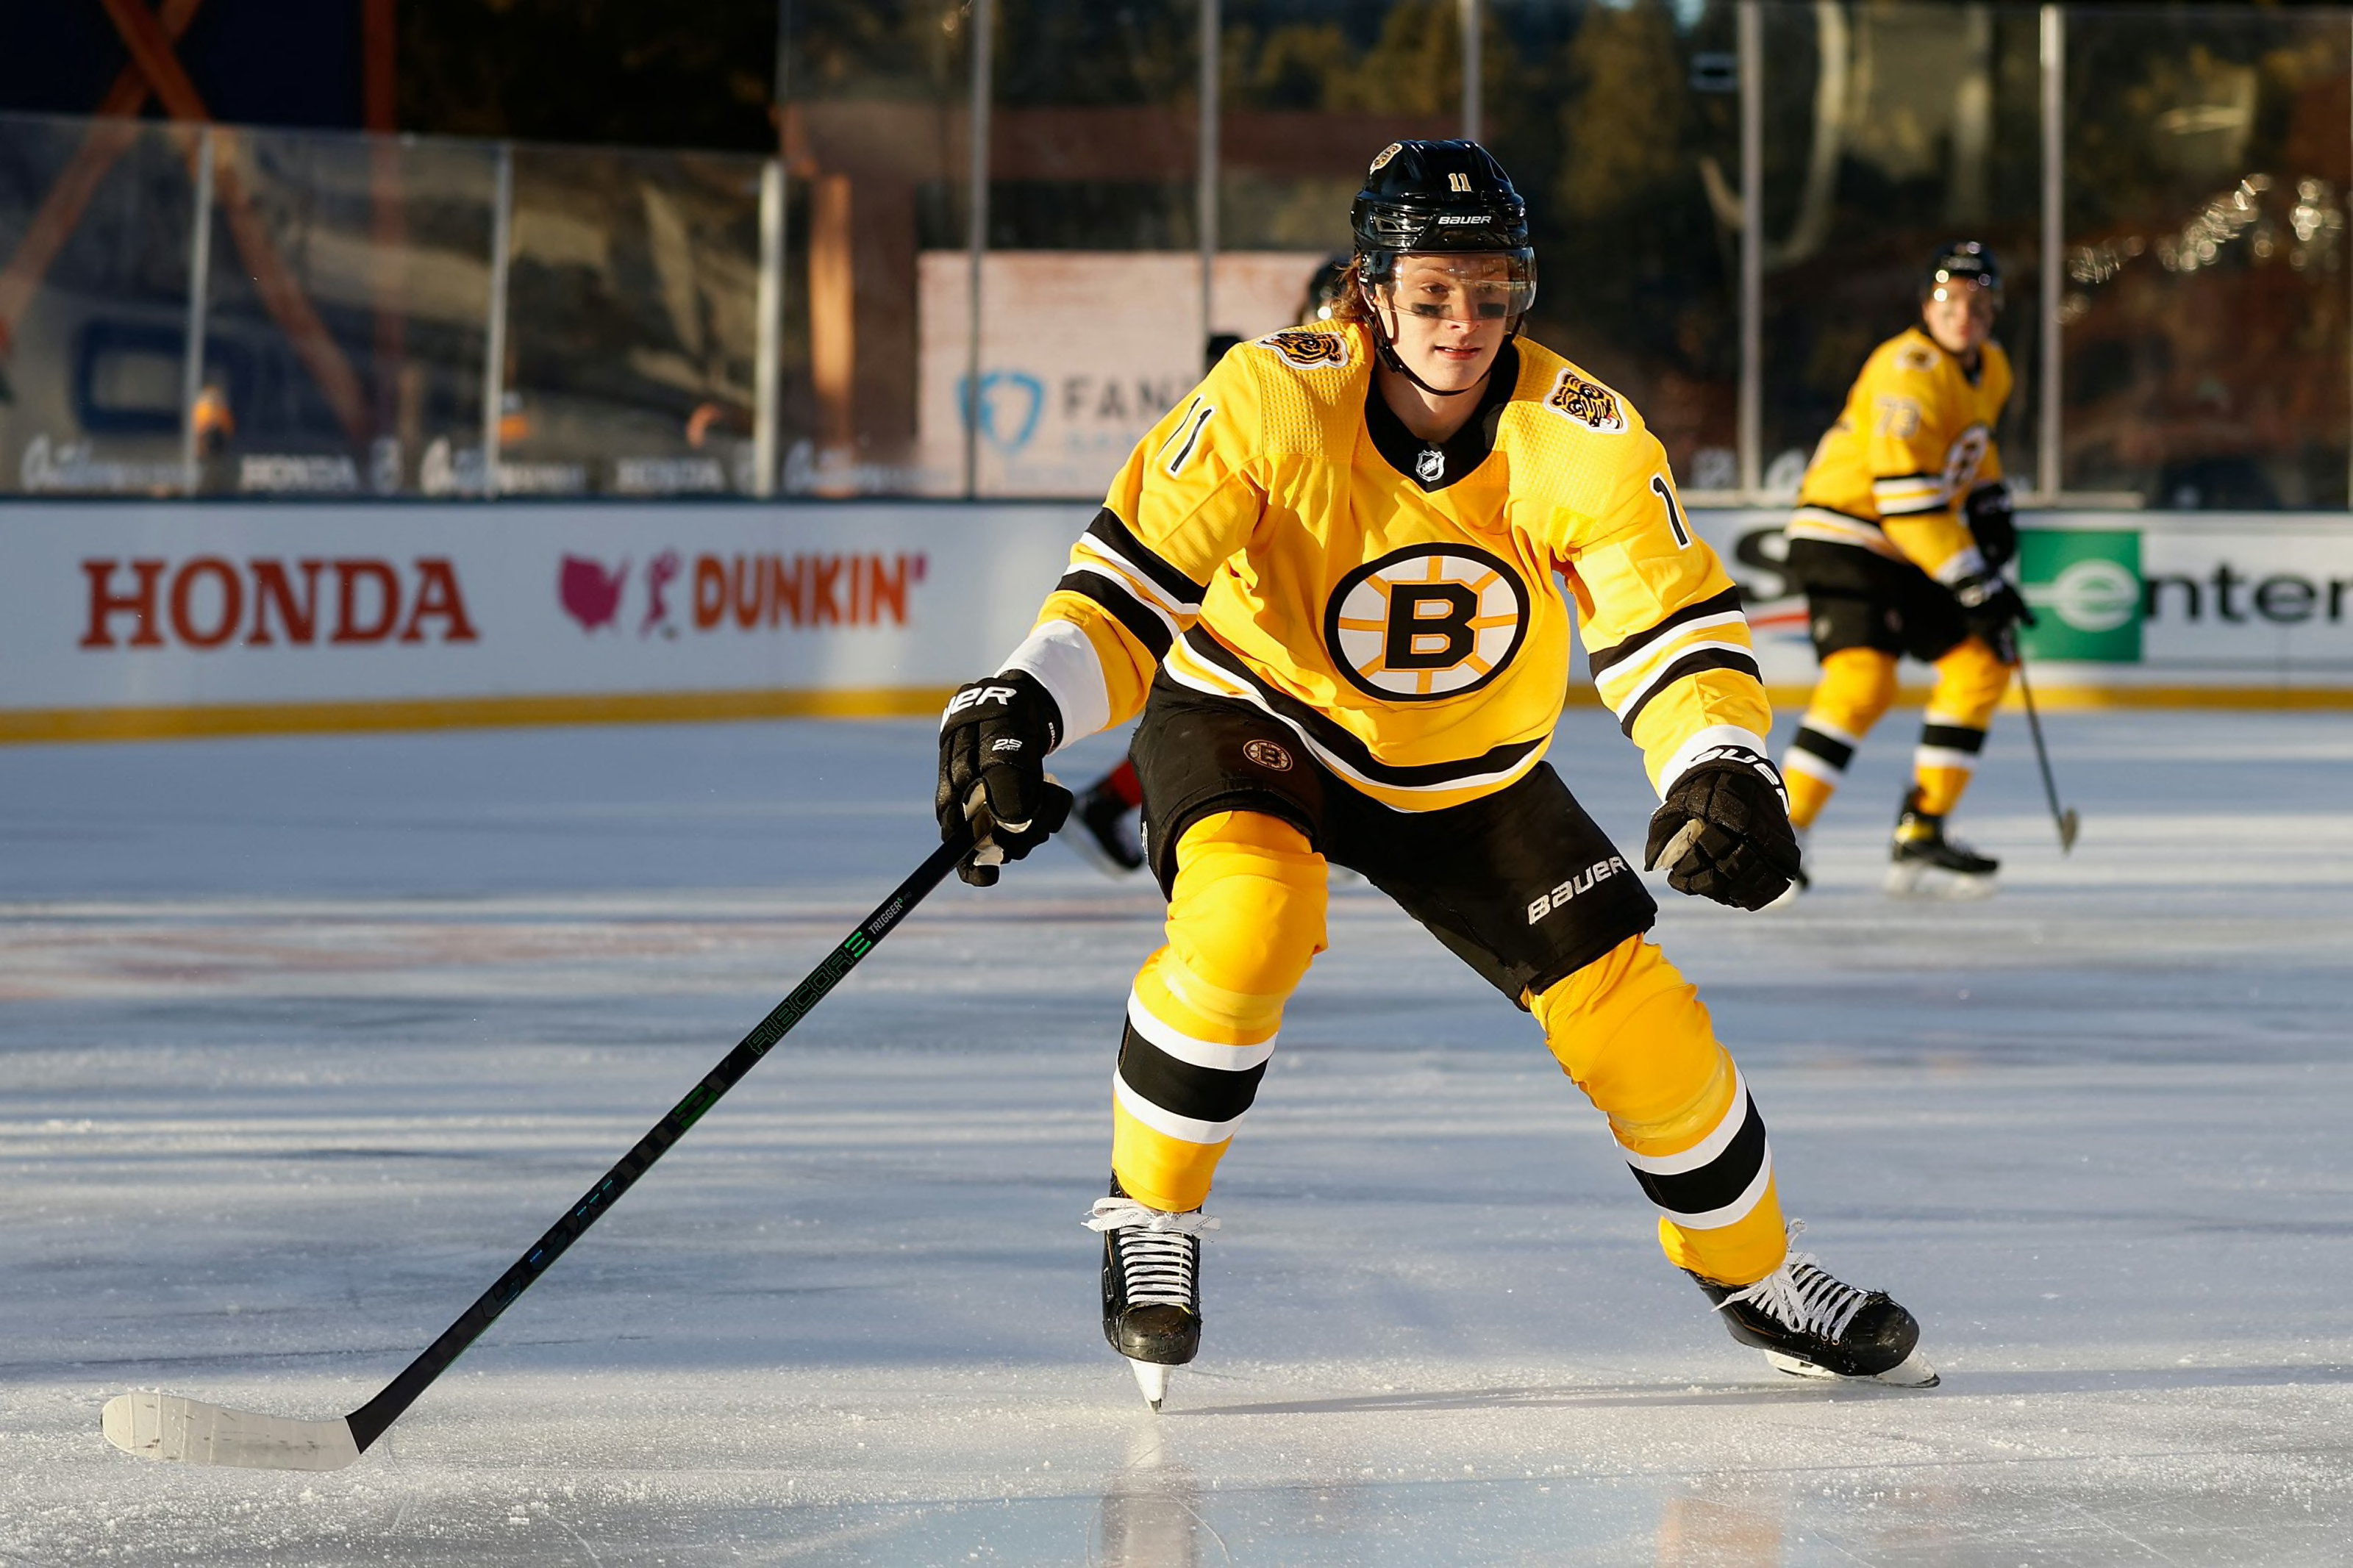 Boston Bruins: Top 8 Prospects worth getting excited about